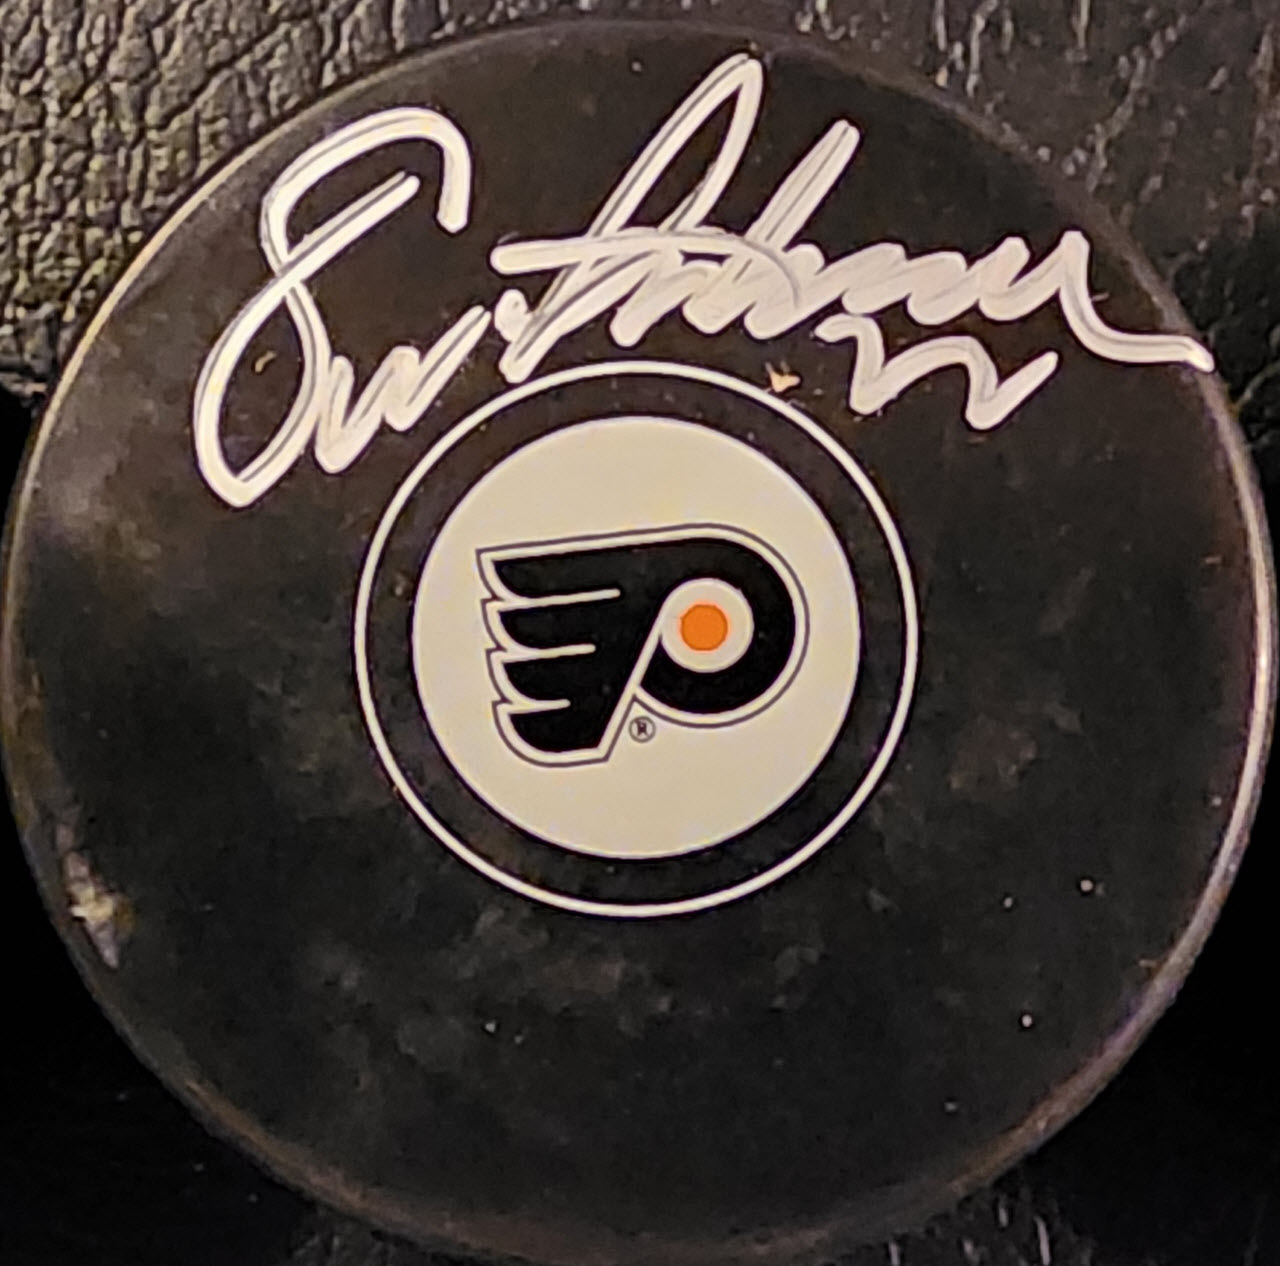 Eric Lindros Autographed Philadelphia Flyers Puck